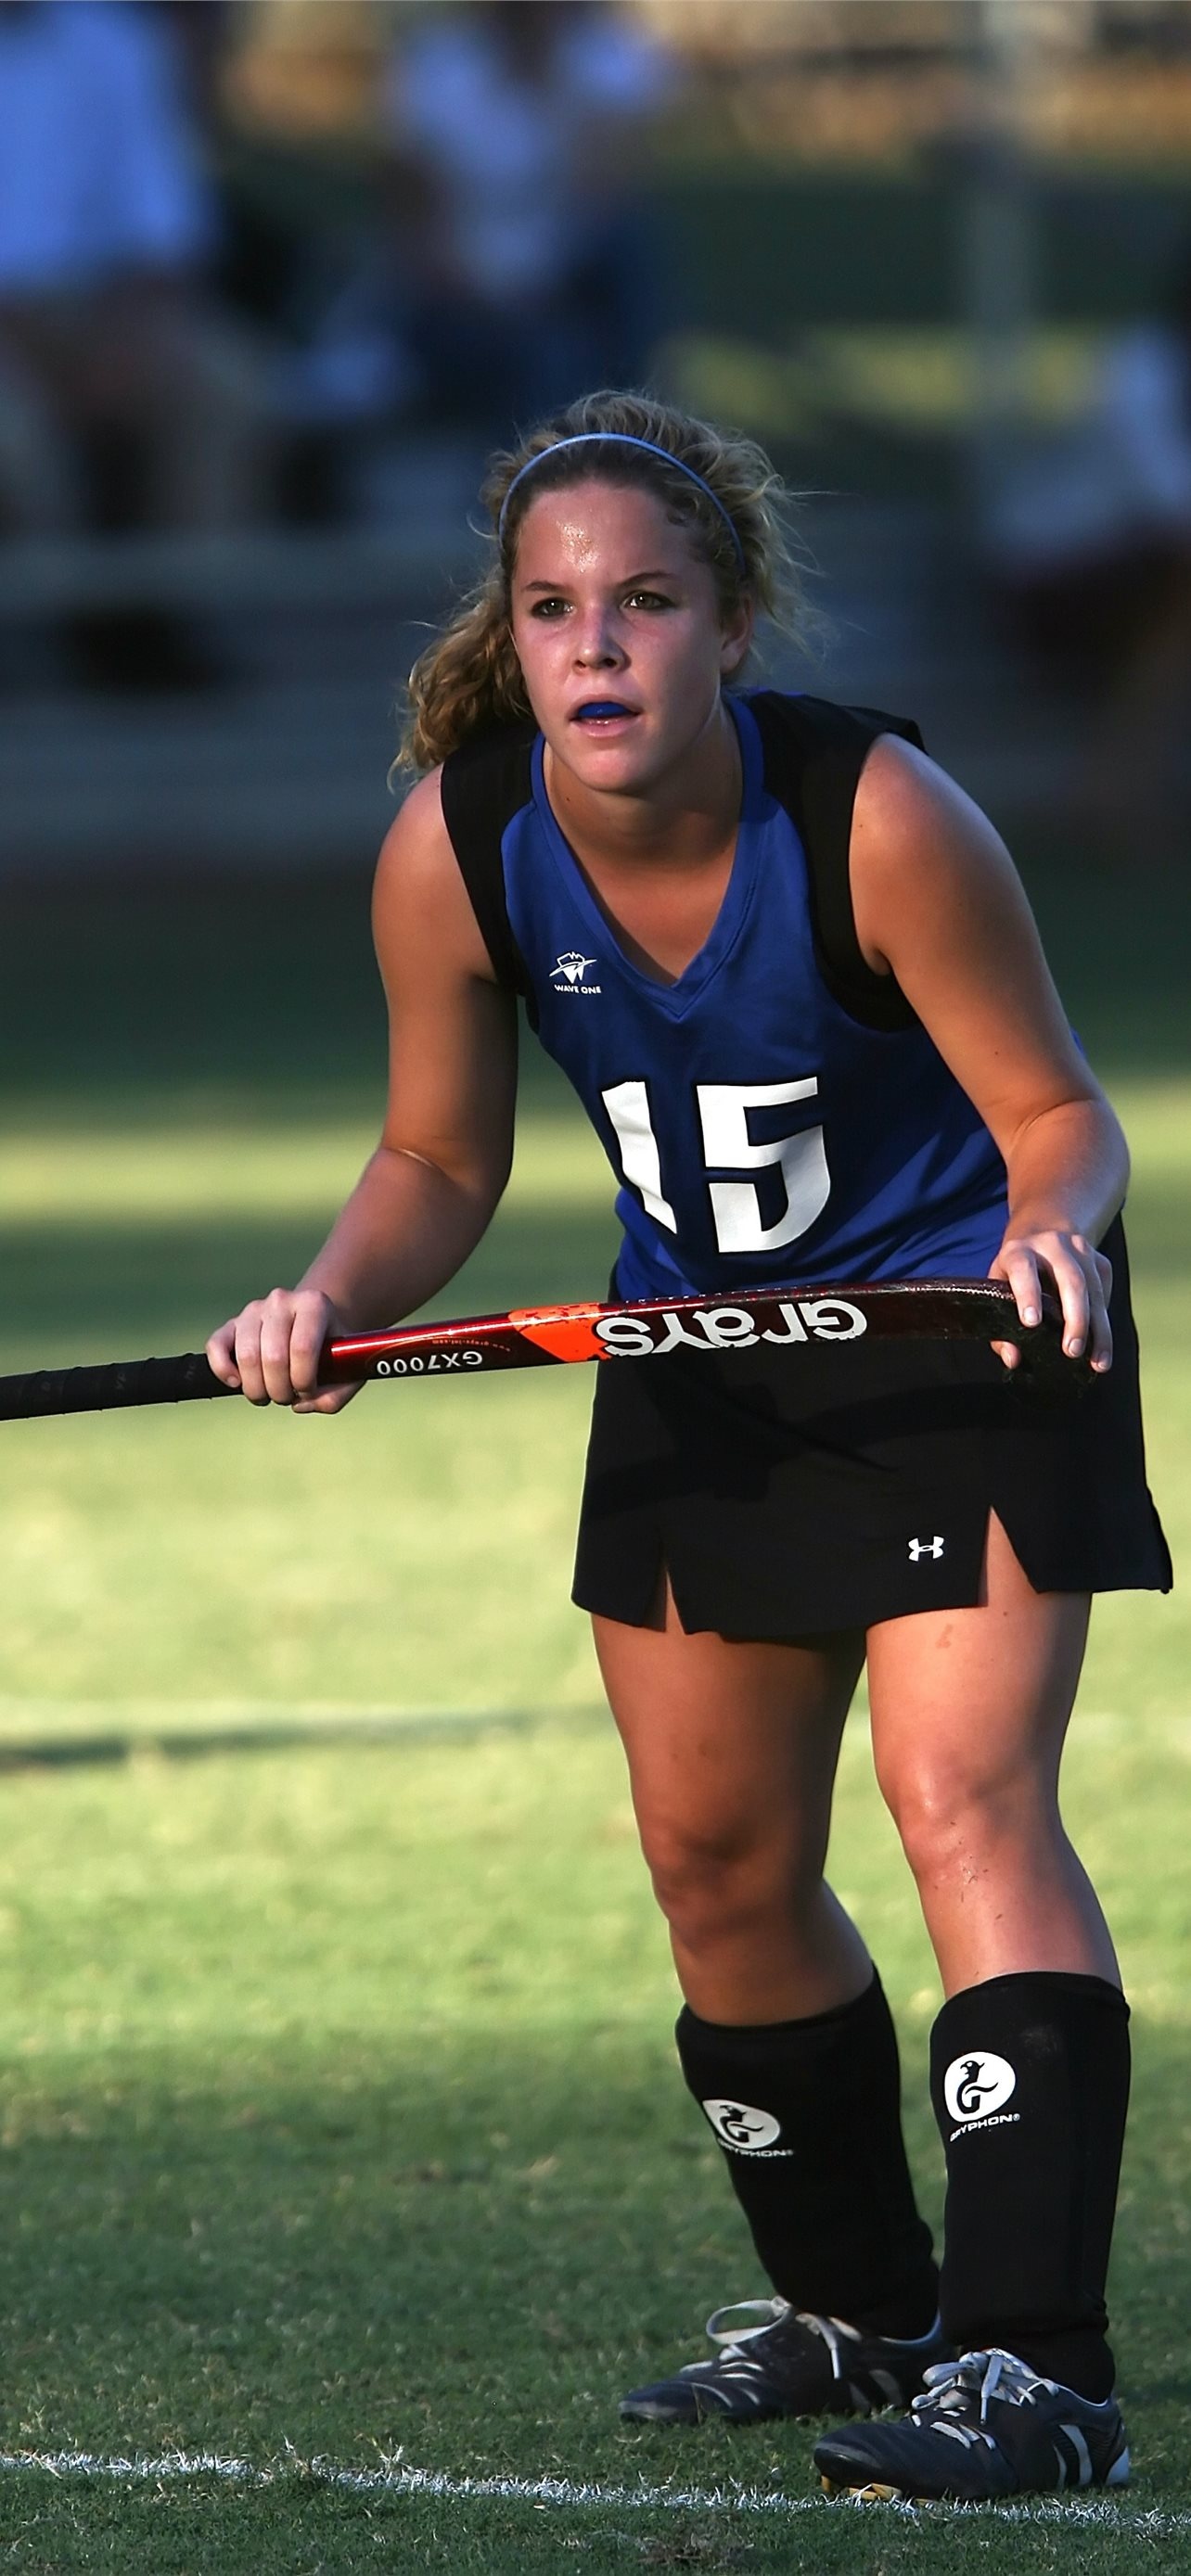 Field Hockey: A female player equipped with a stick, Outdoor competitive sport. 1290x2780 HD Background.